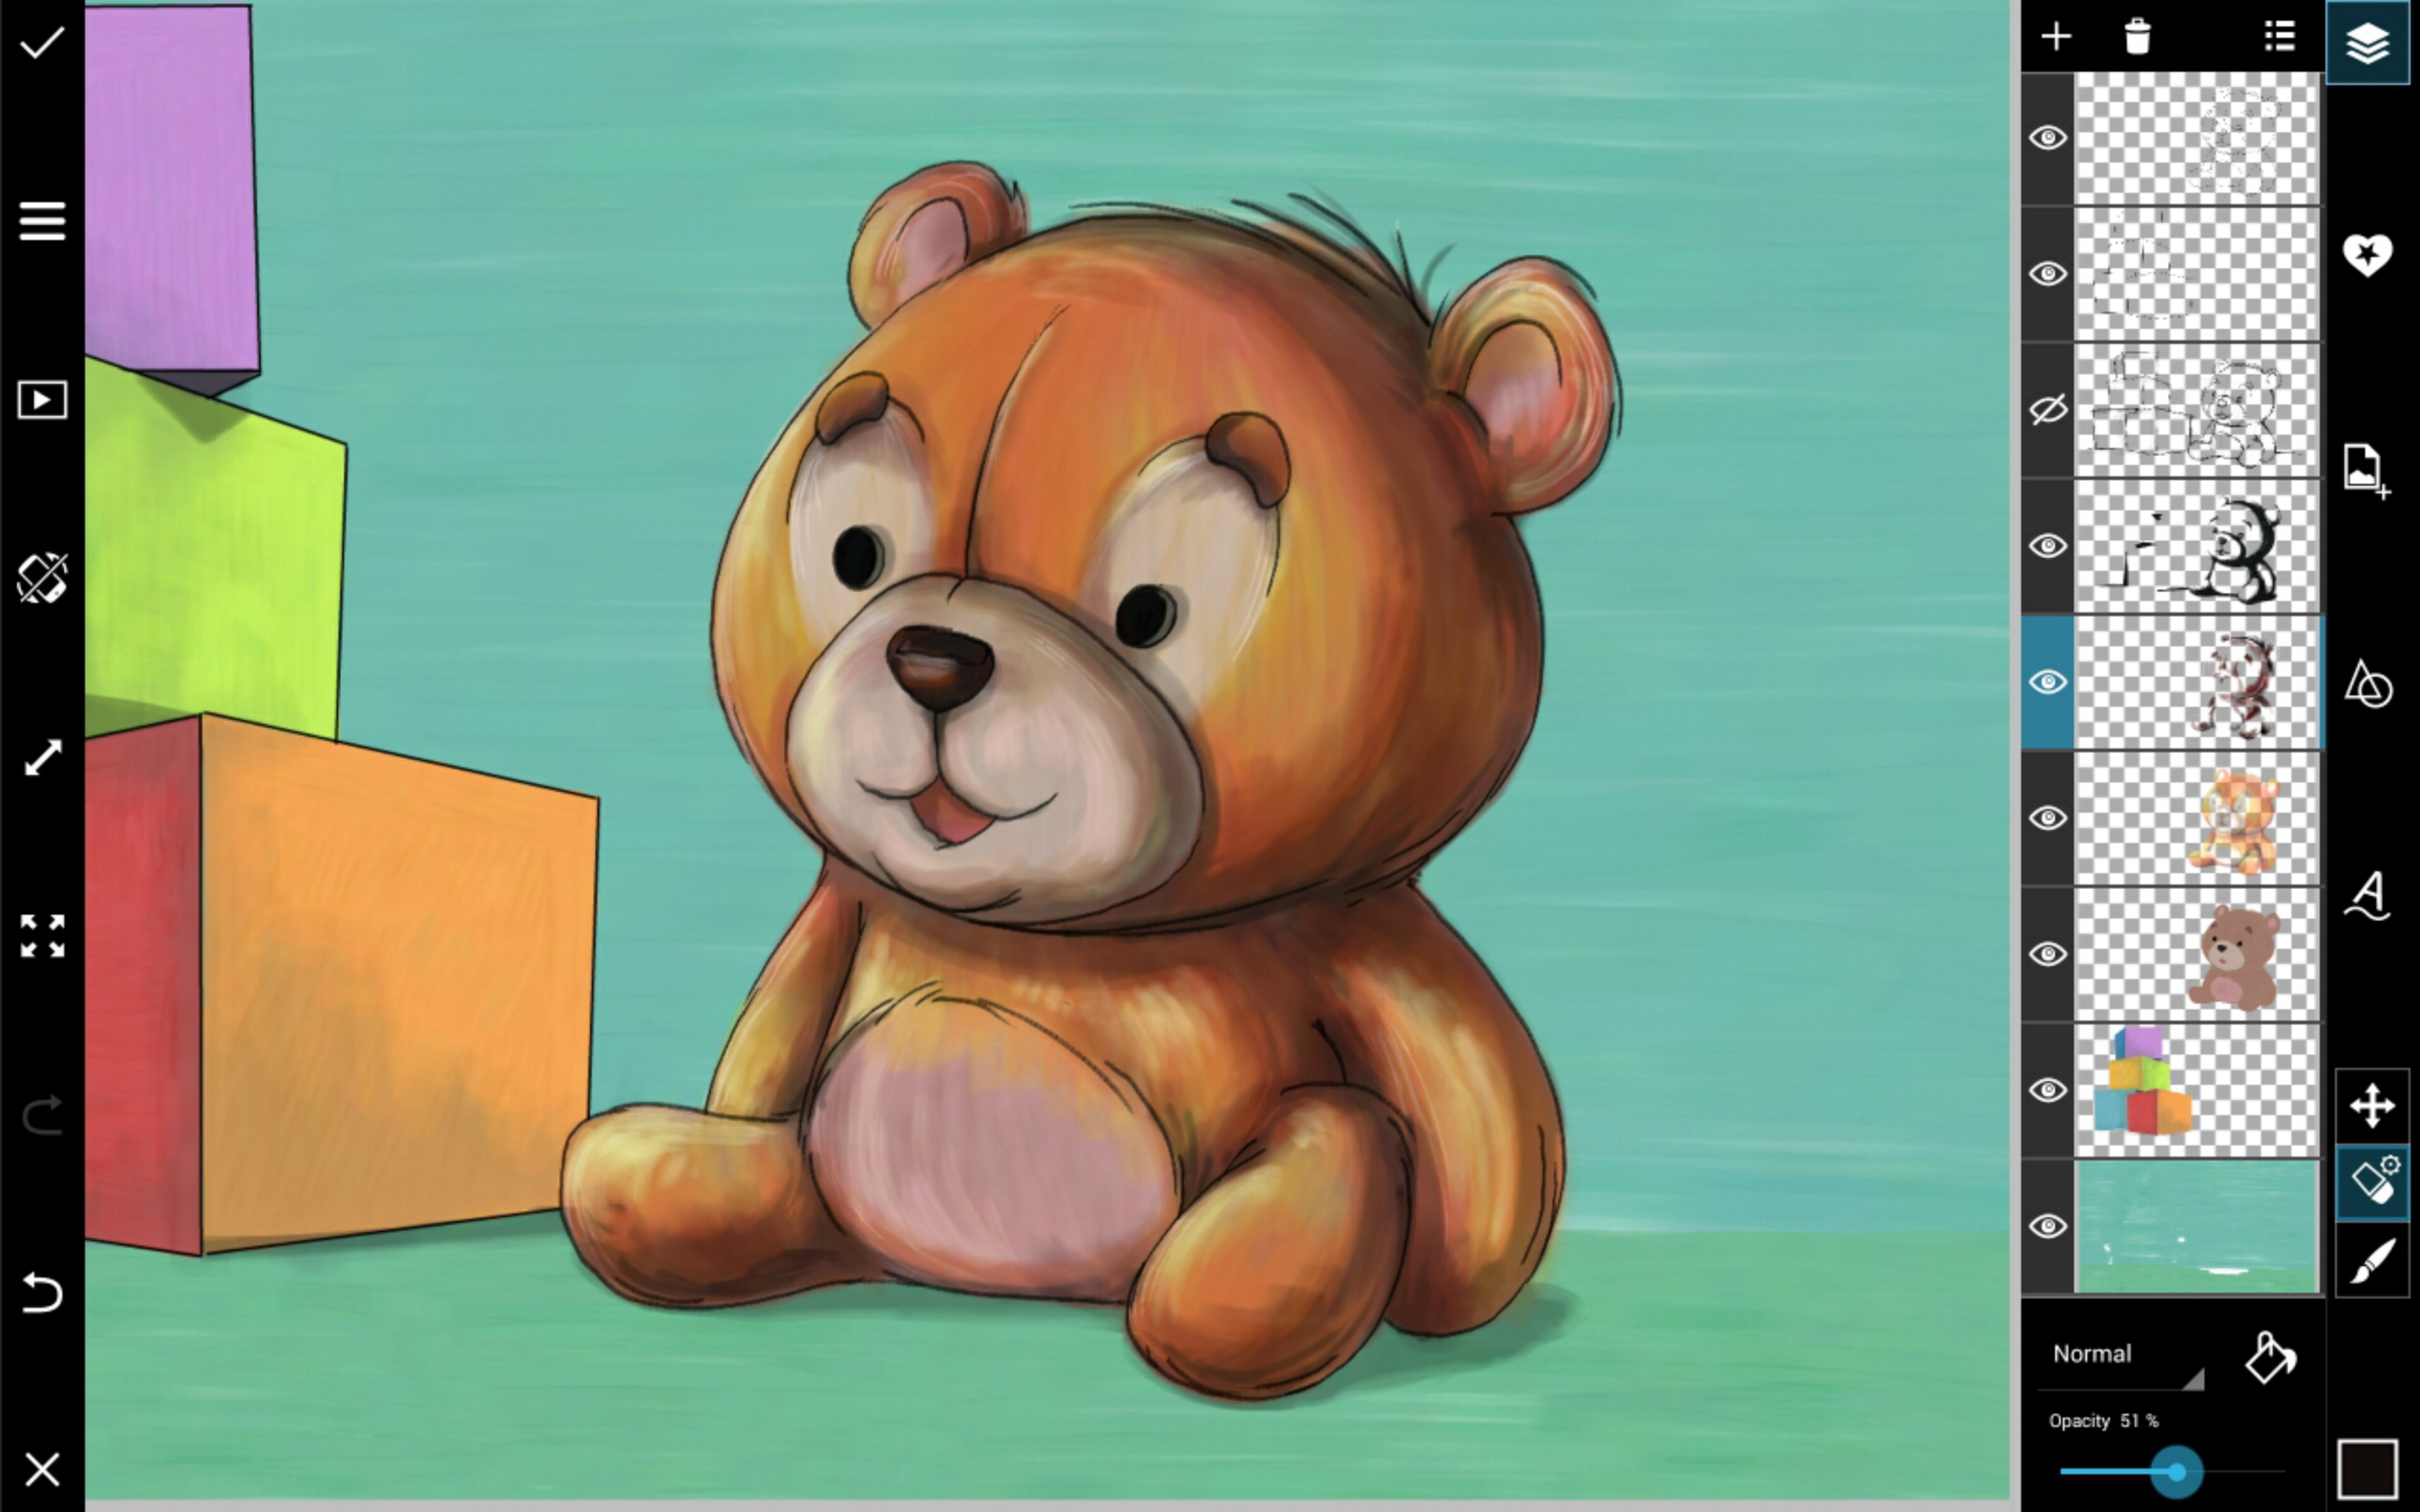 How to Draw a Teddy Bear on PicsArt - Create + Discover with PicsArt